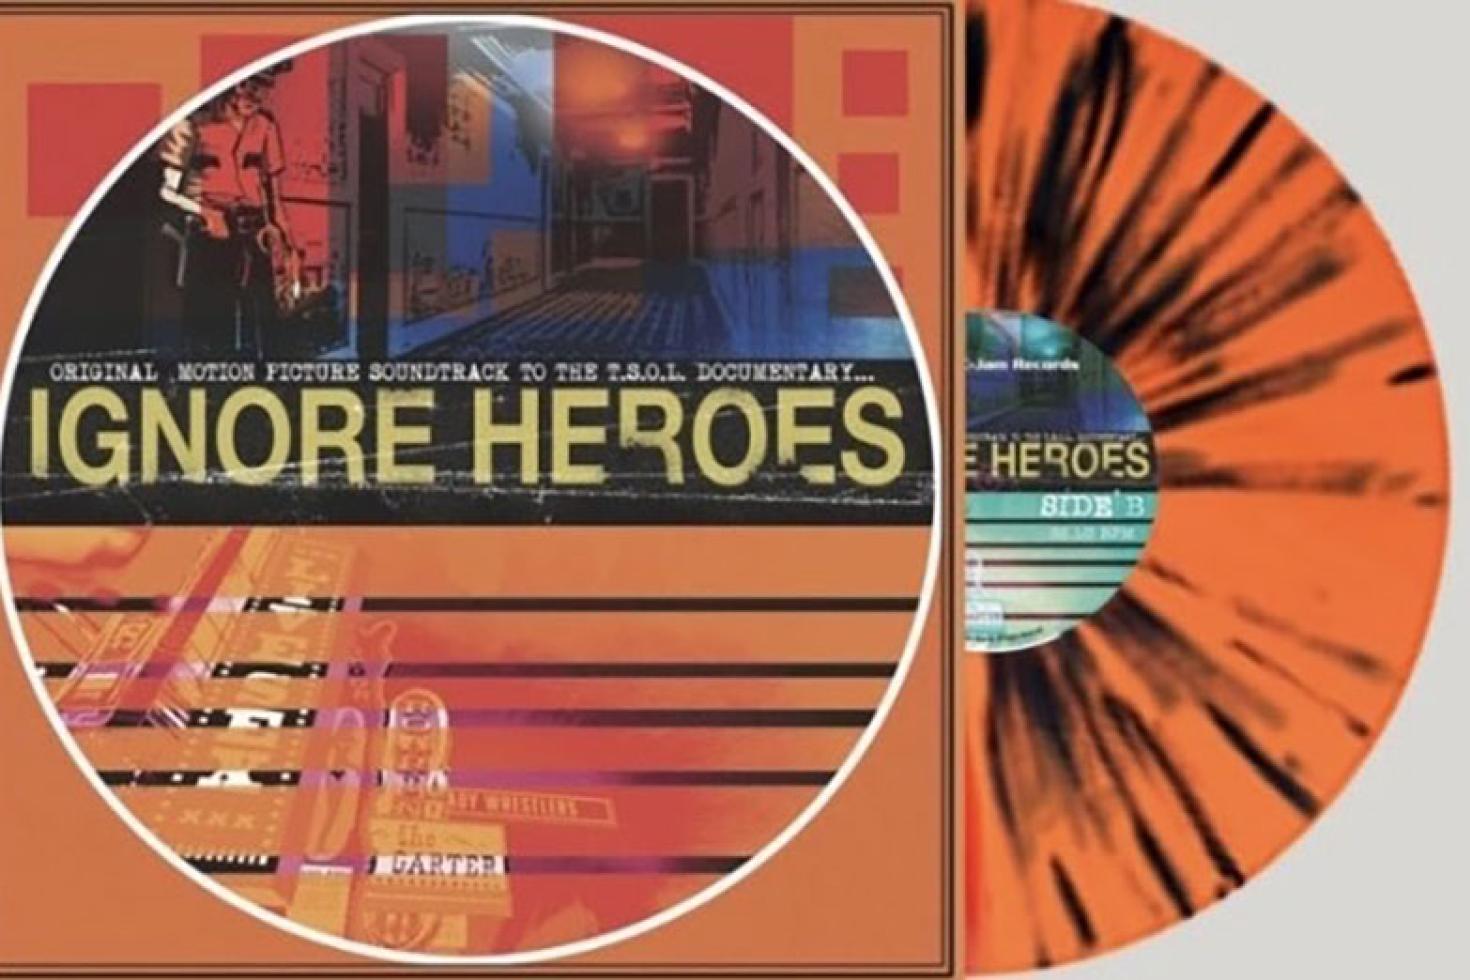 T.S.O.L. release soundtrack to documentary film 'Ignore Heroes'